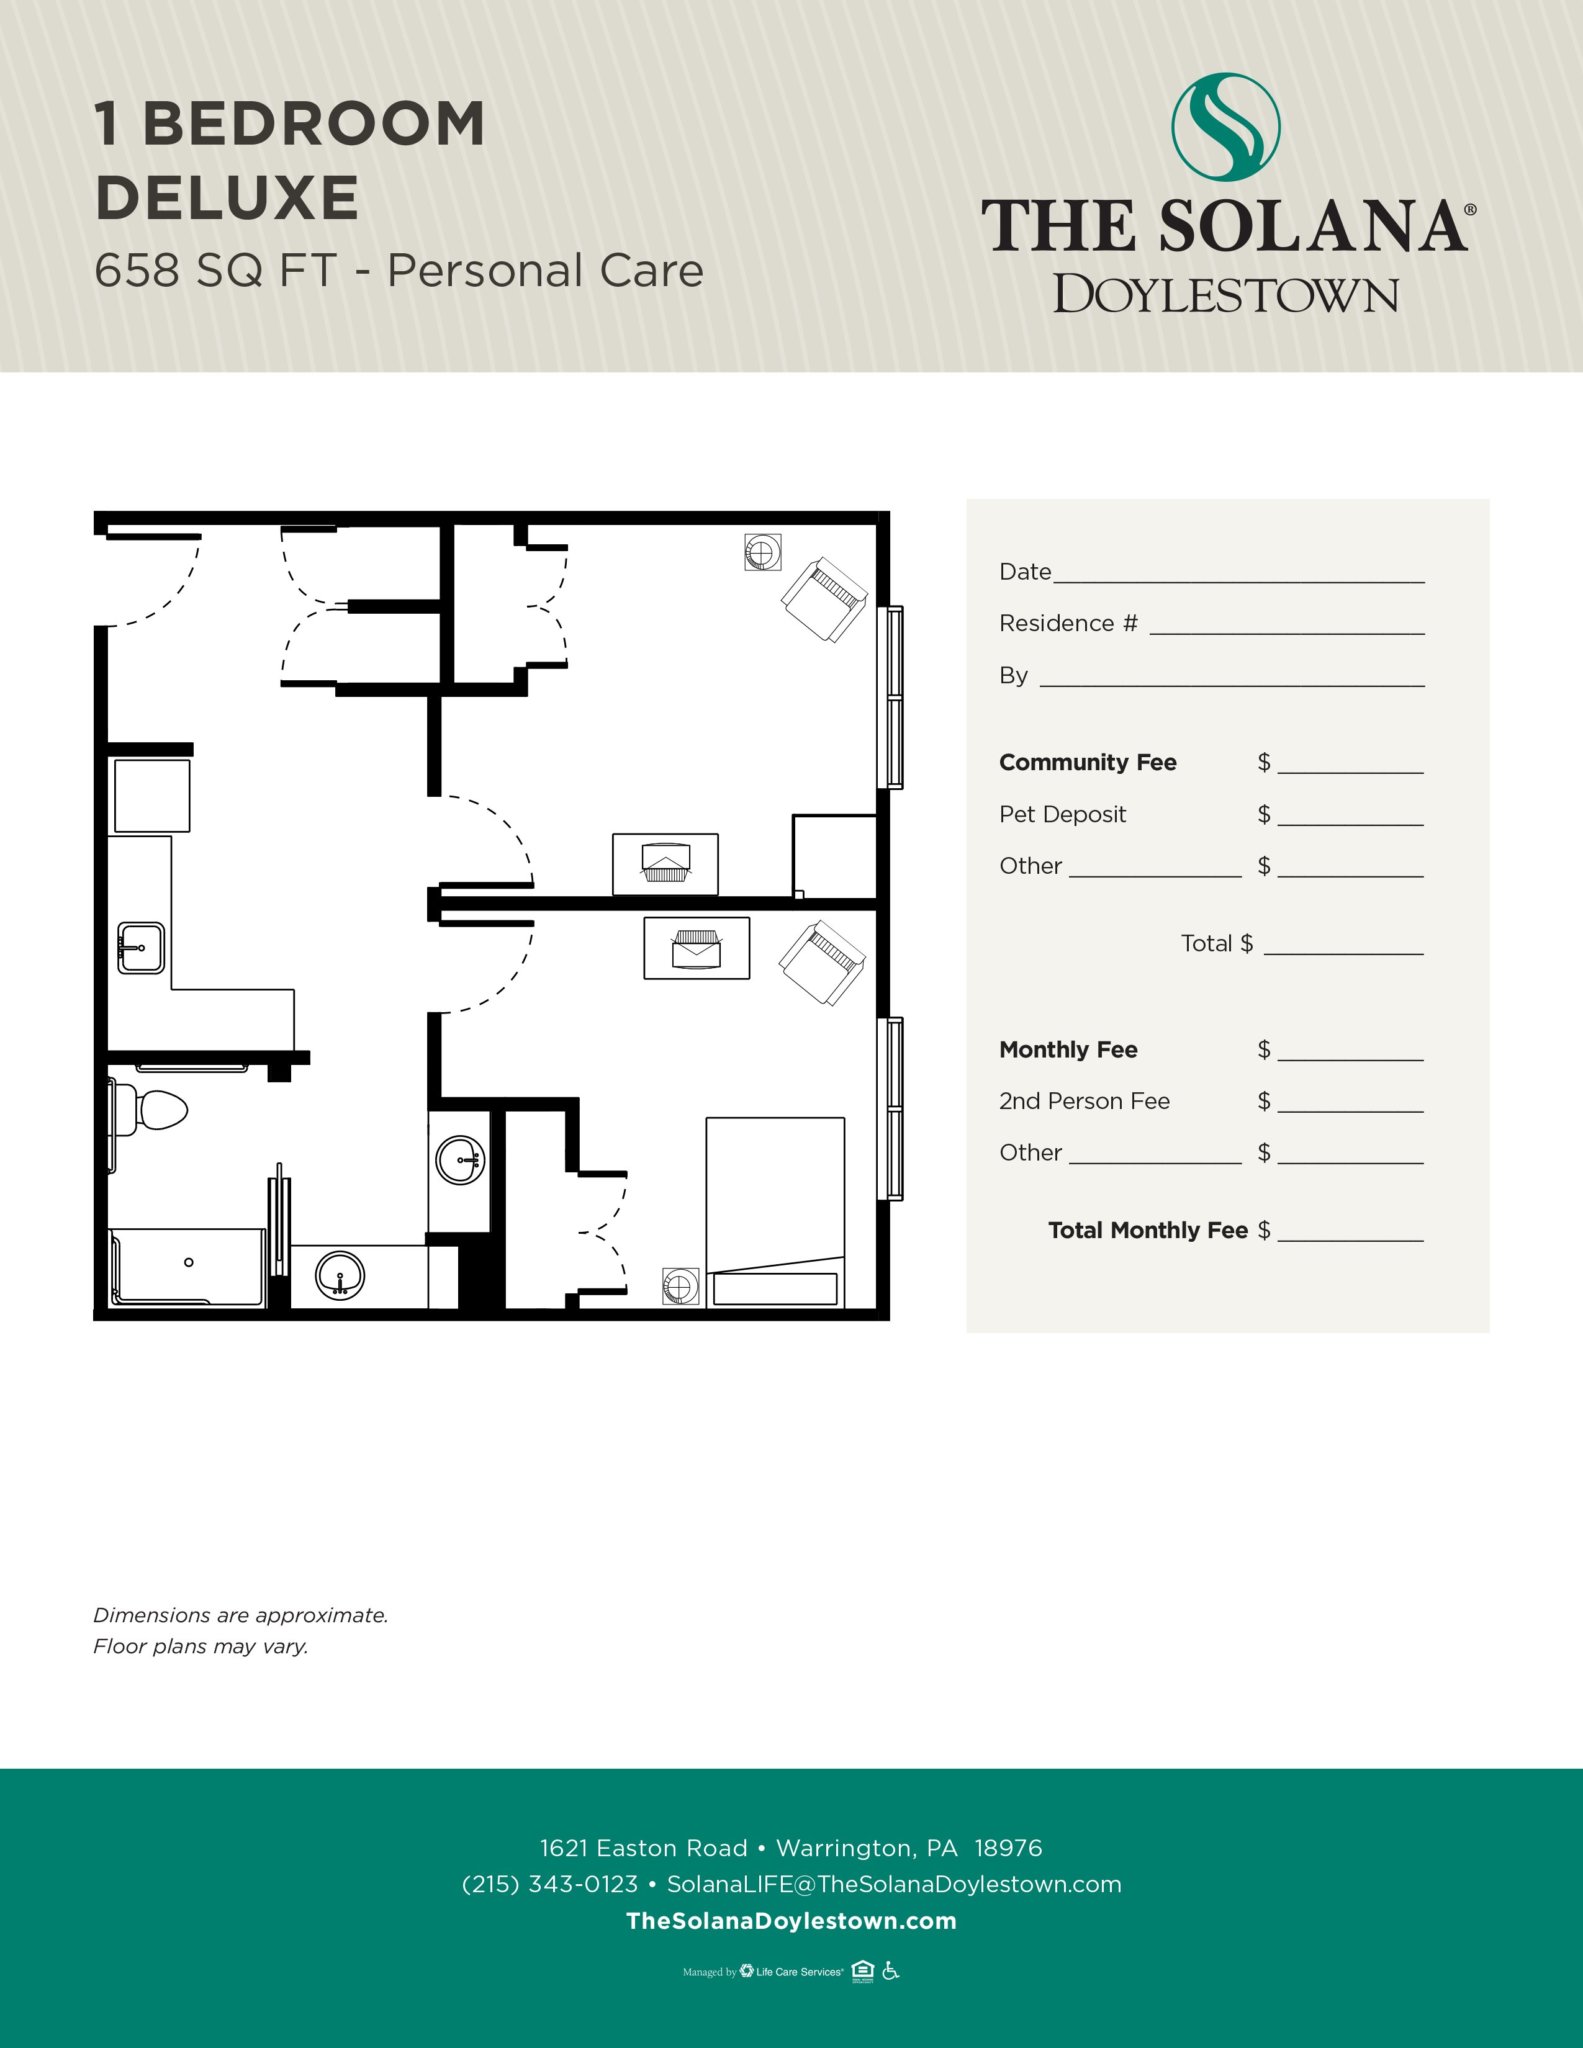 Floor plan for a 1 bedroom deluxe unit with 658 sq ft in a senior living community.